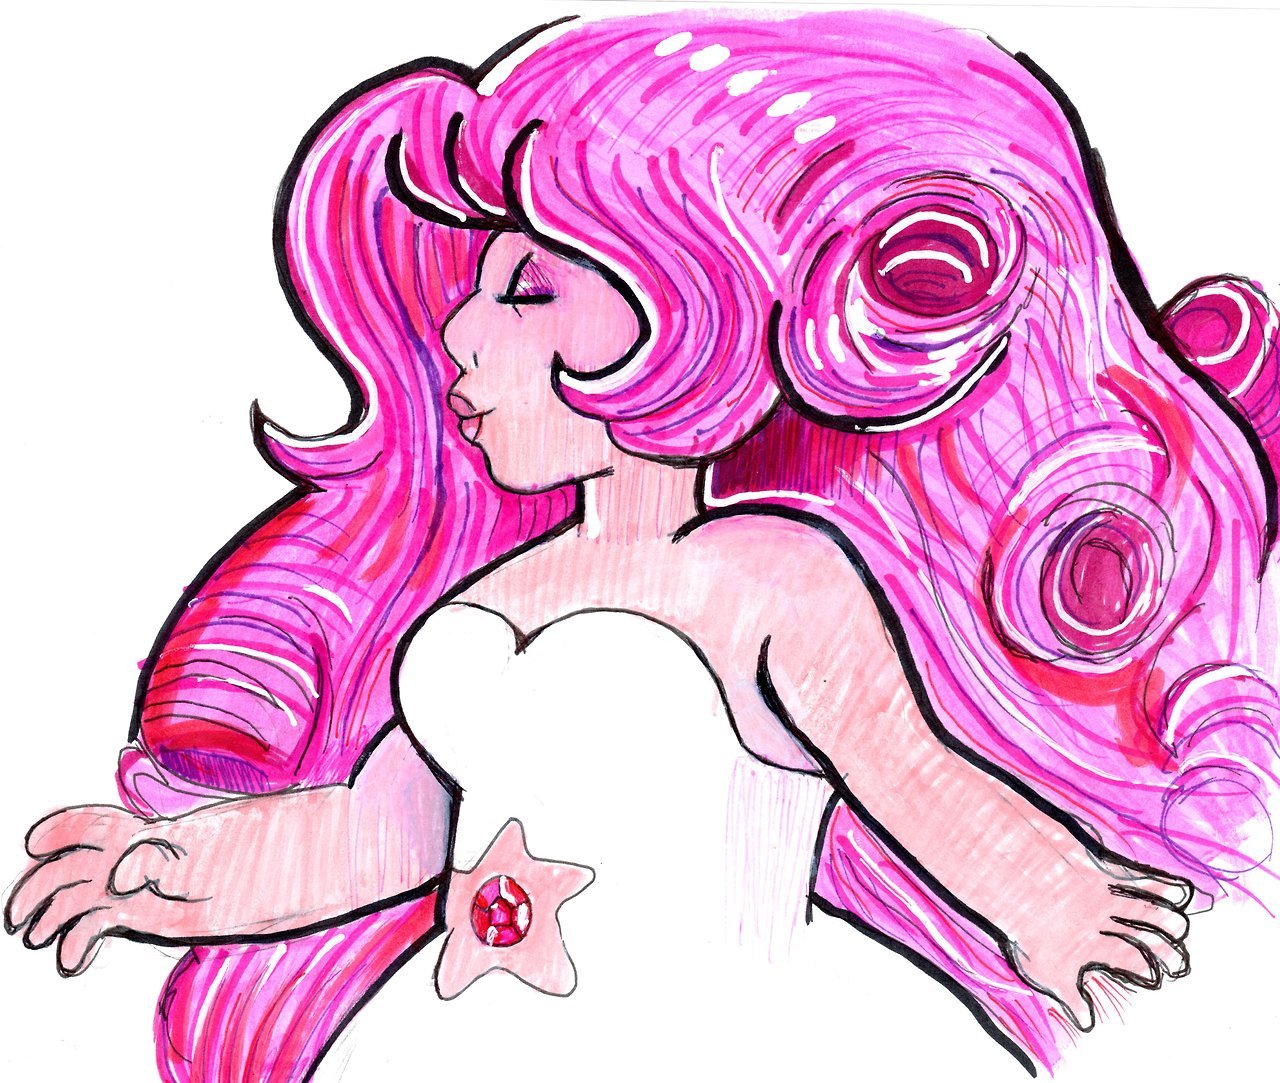 ROSE QUARTZ- from Steven Universe Done with sharpies, wite-out, crayola markers, and pens